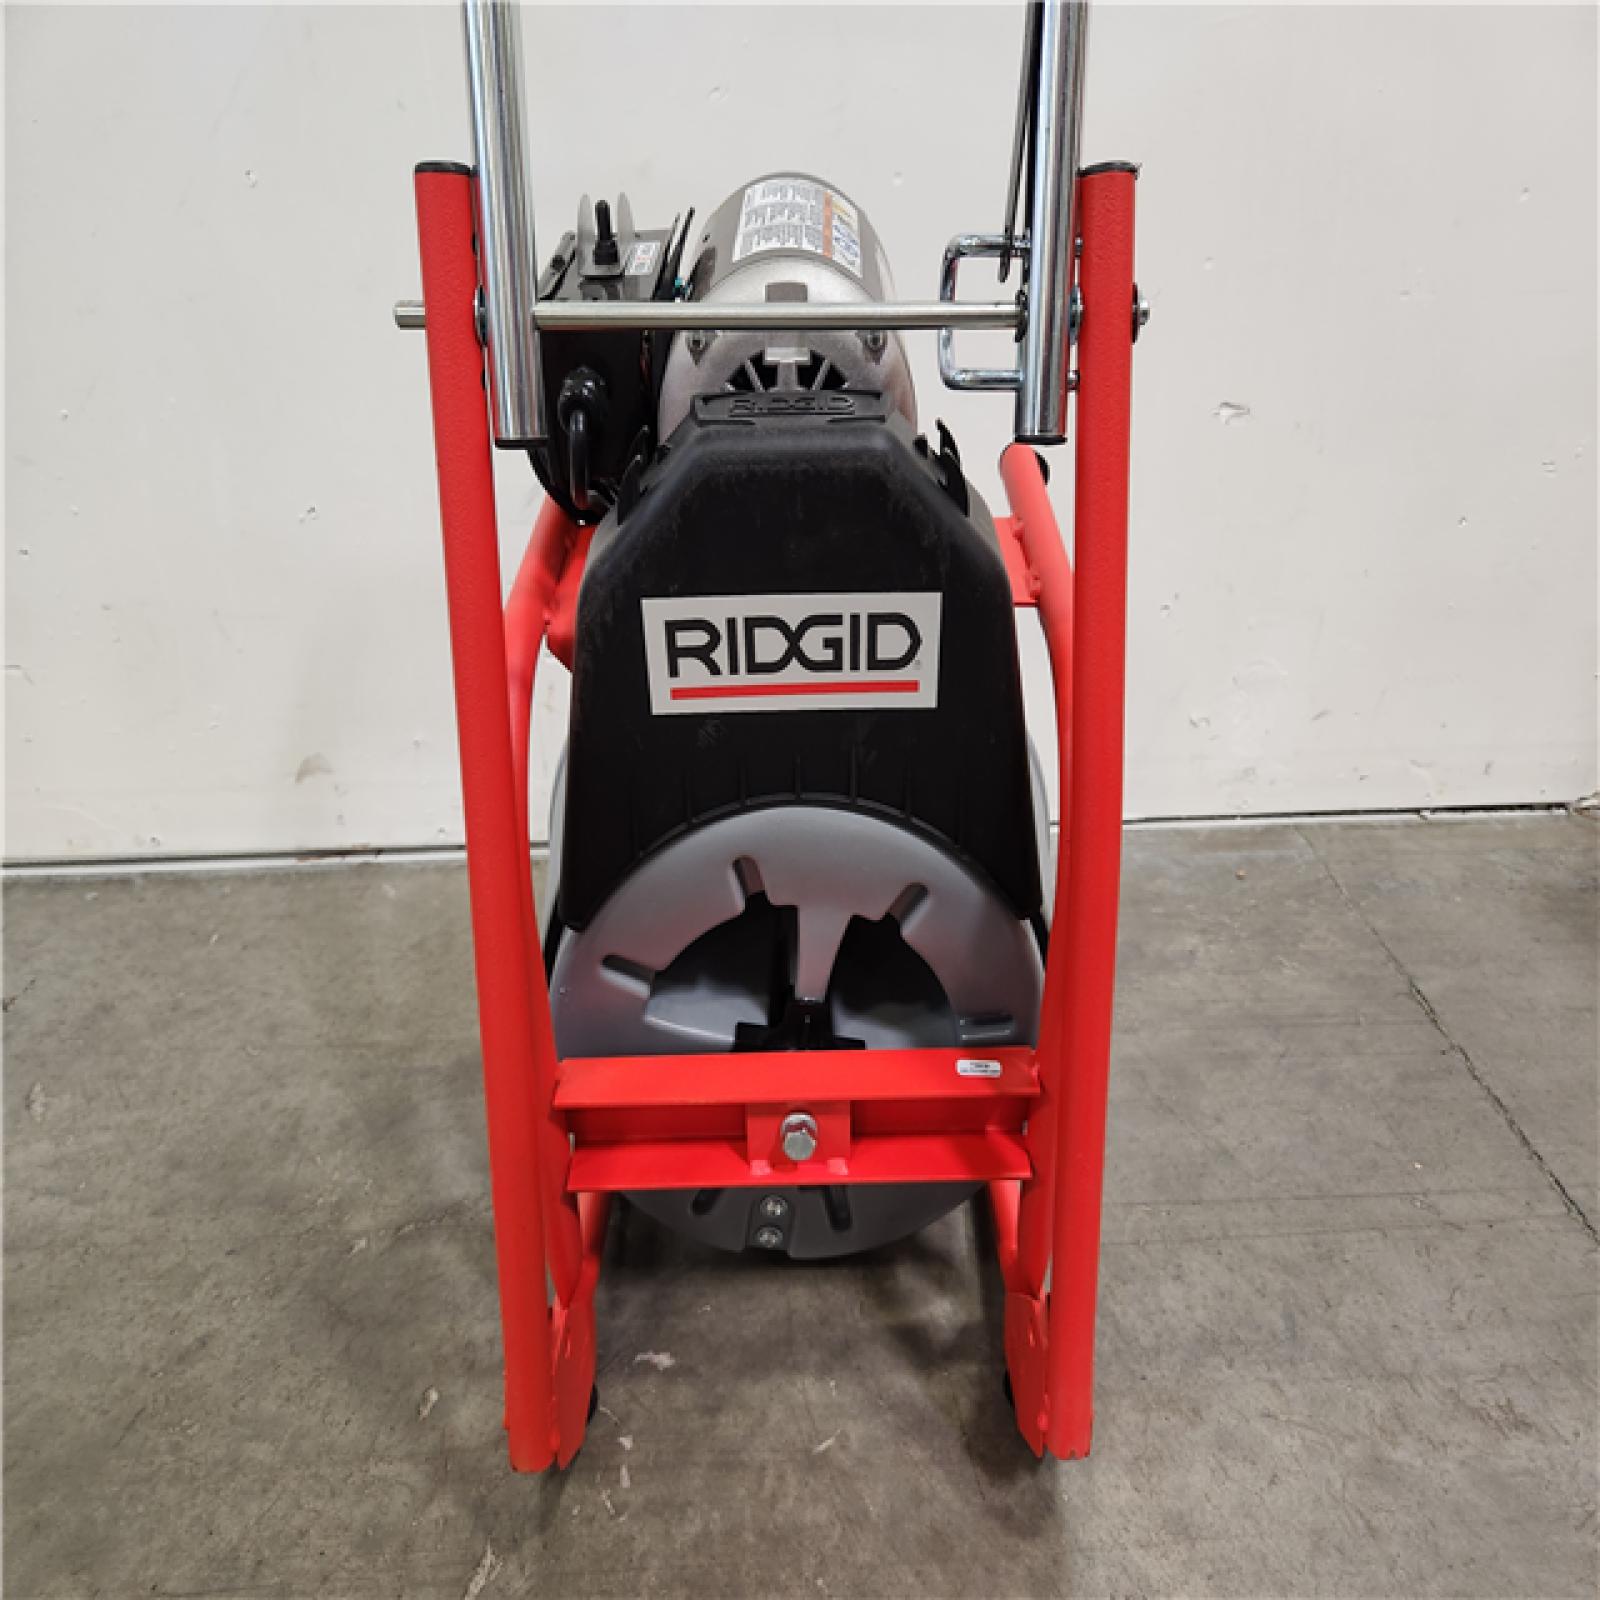 Phoenix Location NEW RIDGID K-400 Drain Cleaning Snake Auger 120-Volt Drum Machine with C-32IW 3/8 in. x 75 ft. Cable + RIDGID Autofeed Accessory Add On/Replacement for K-400 Drain Cleaning Snake Auger Machine, Automatically Feeds Cable In/Out